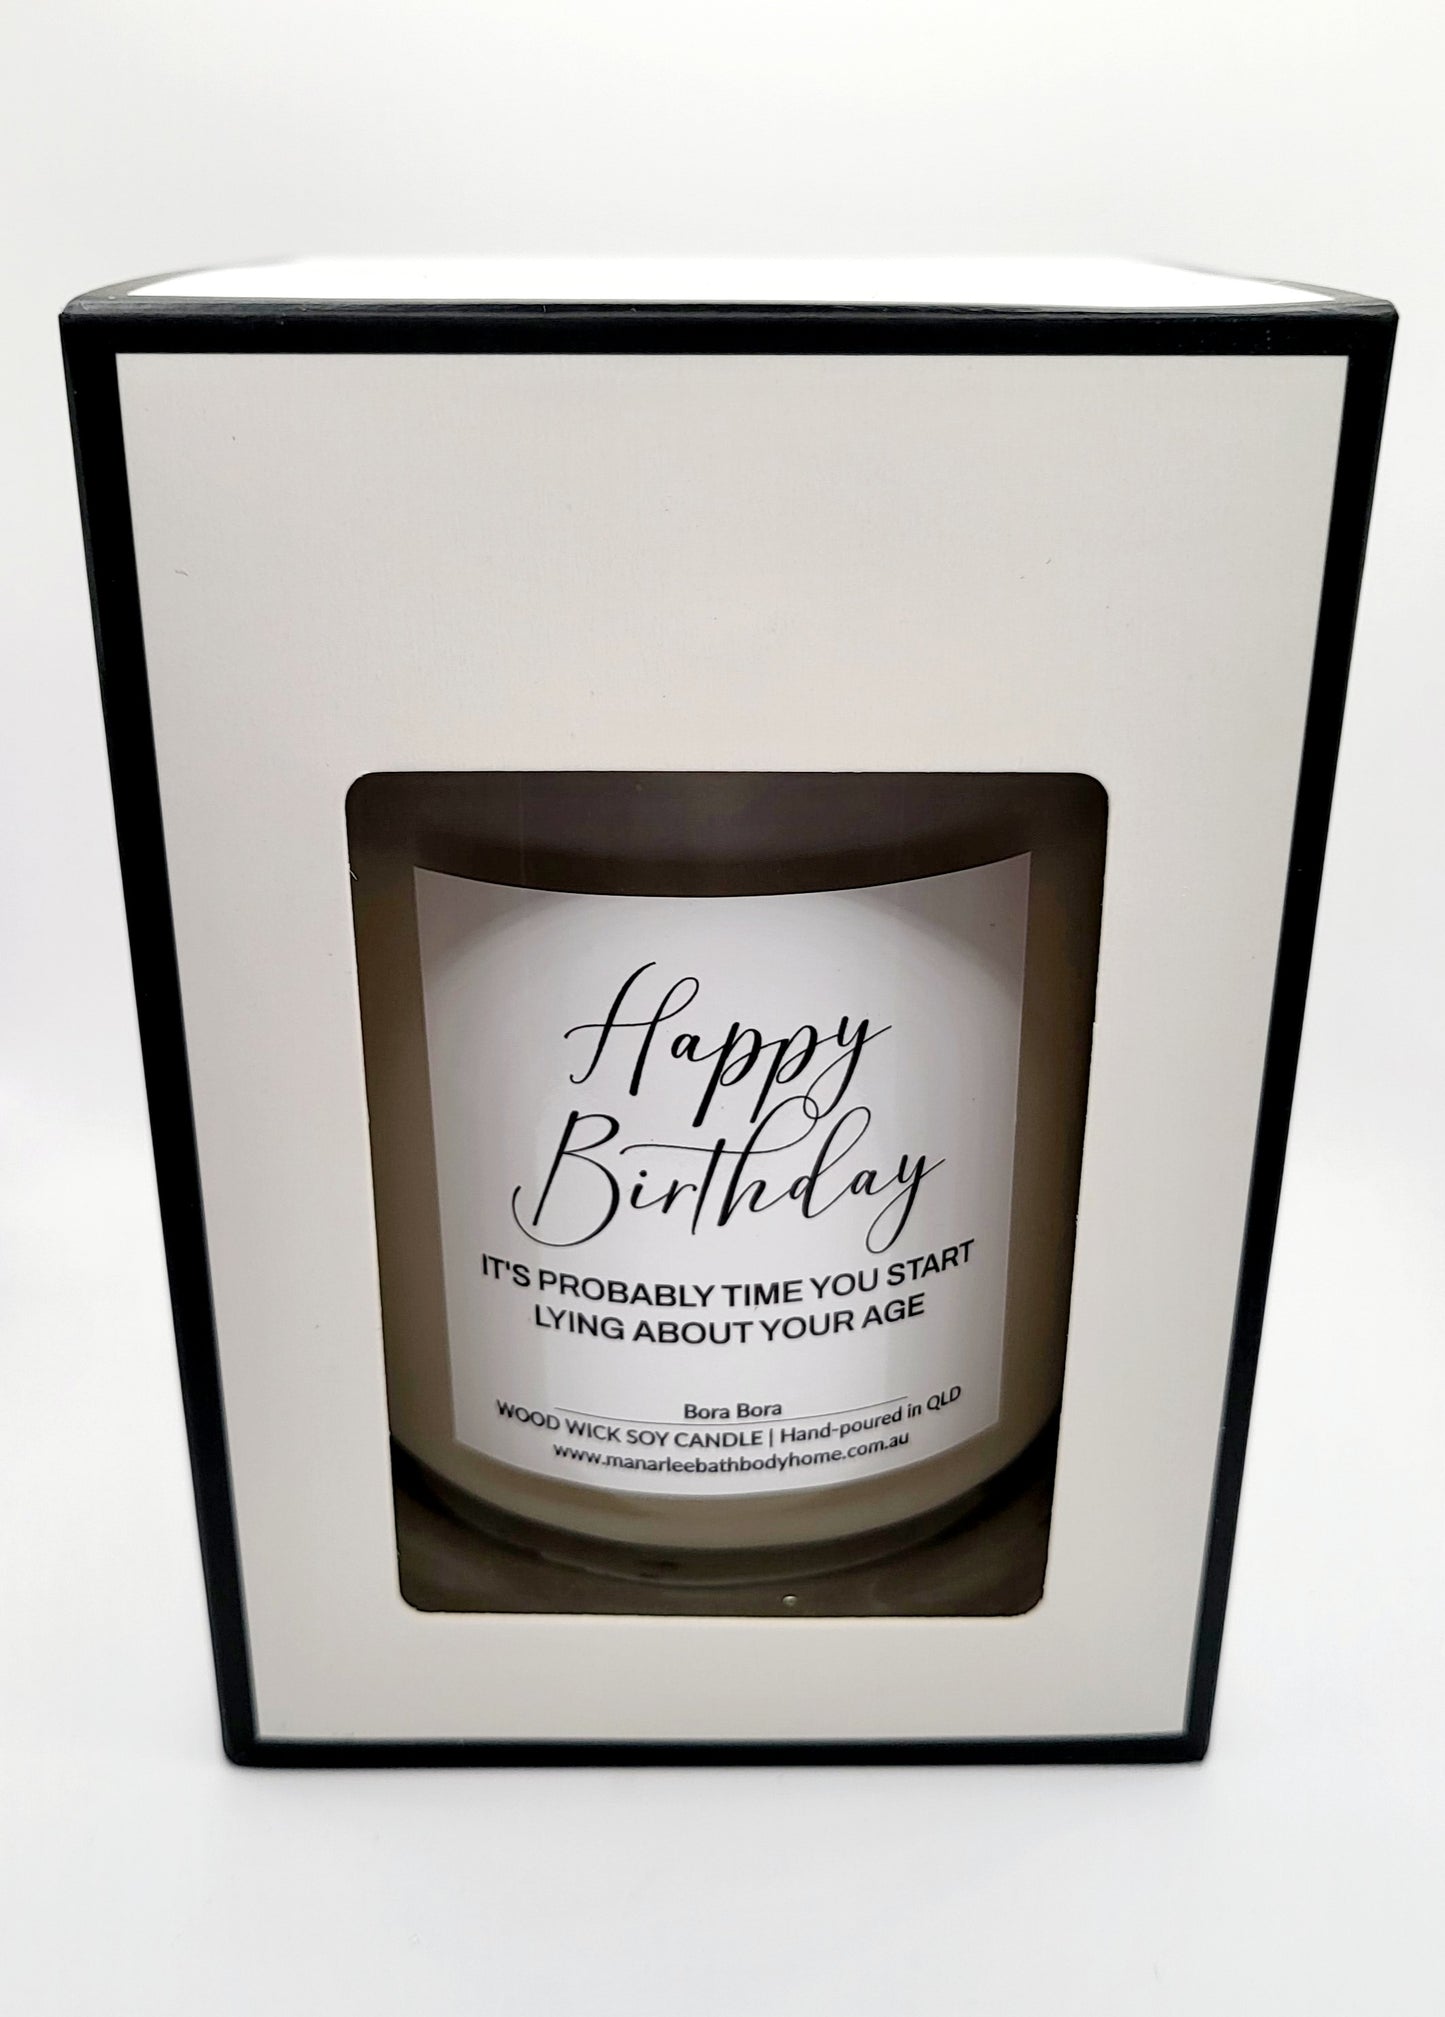 Wood Wick Soy Candle "Happy Birthday It's Probably Time You Start Lying About Your Age"